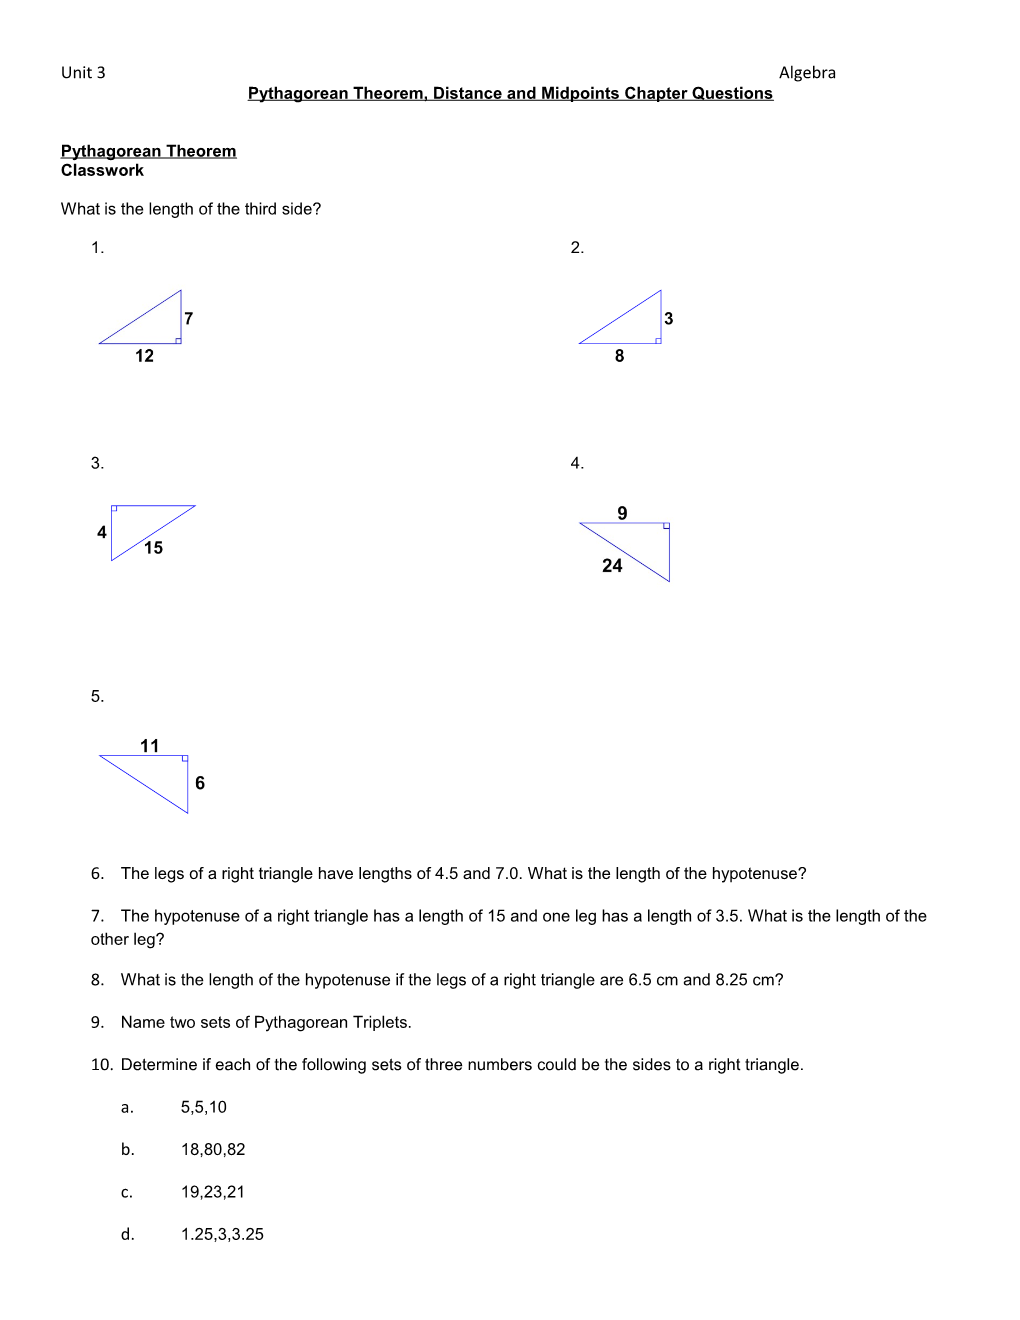 Pythagorean Theorem, Distance and Midpoints Chapter Questions